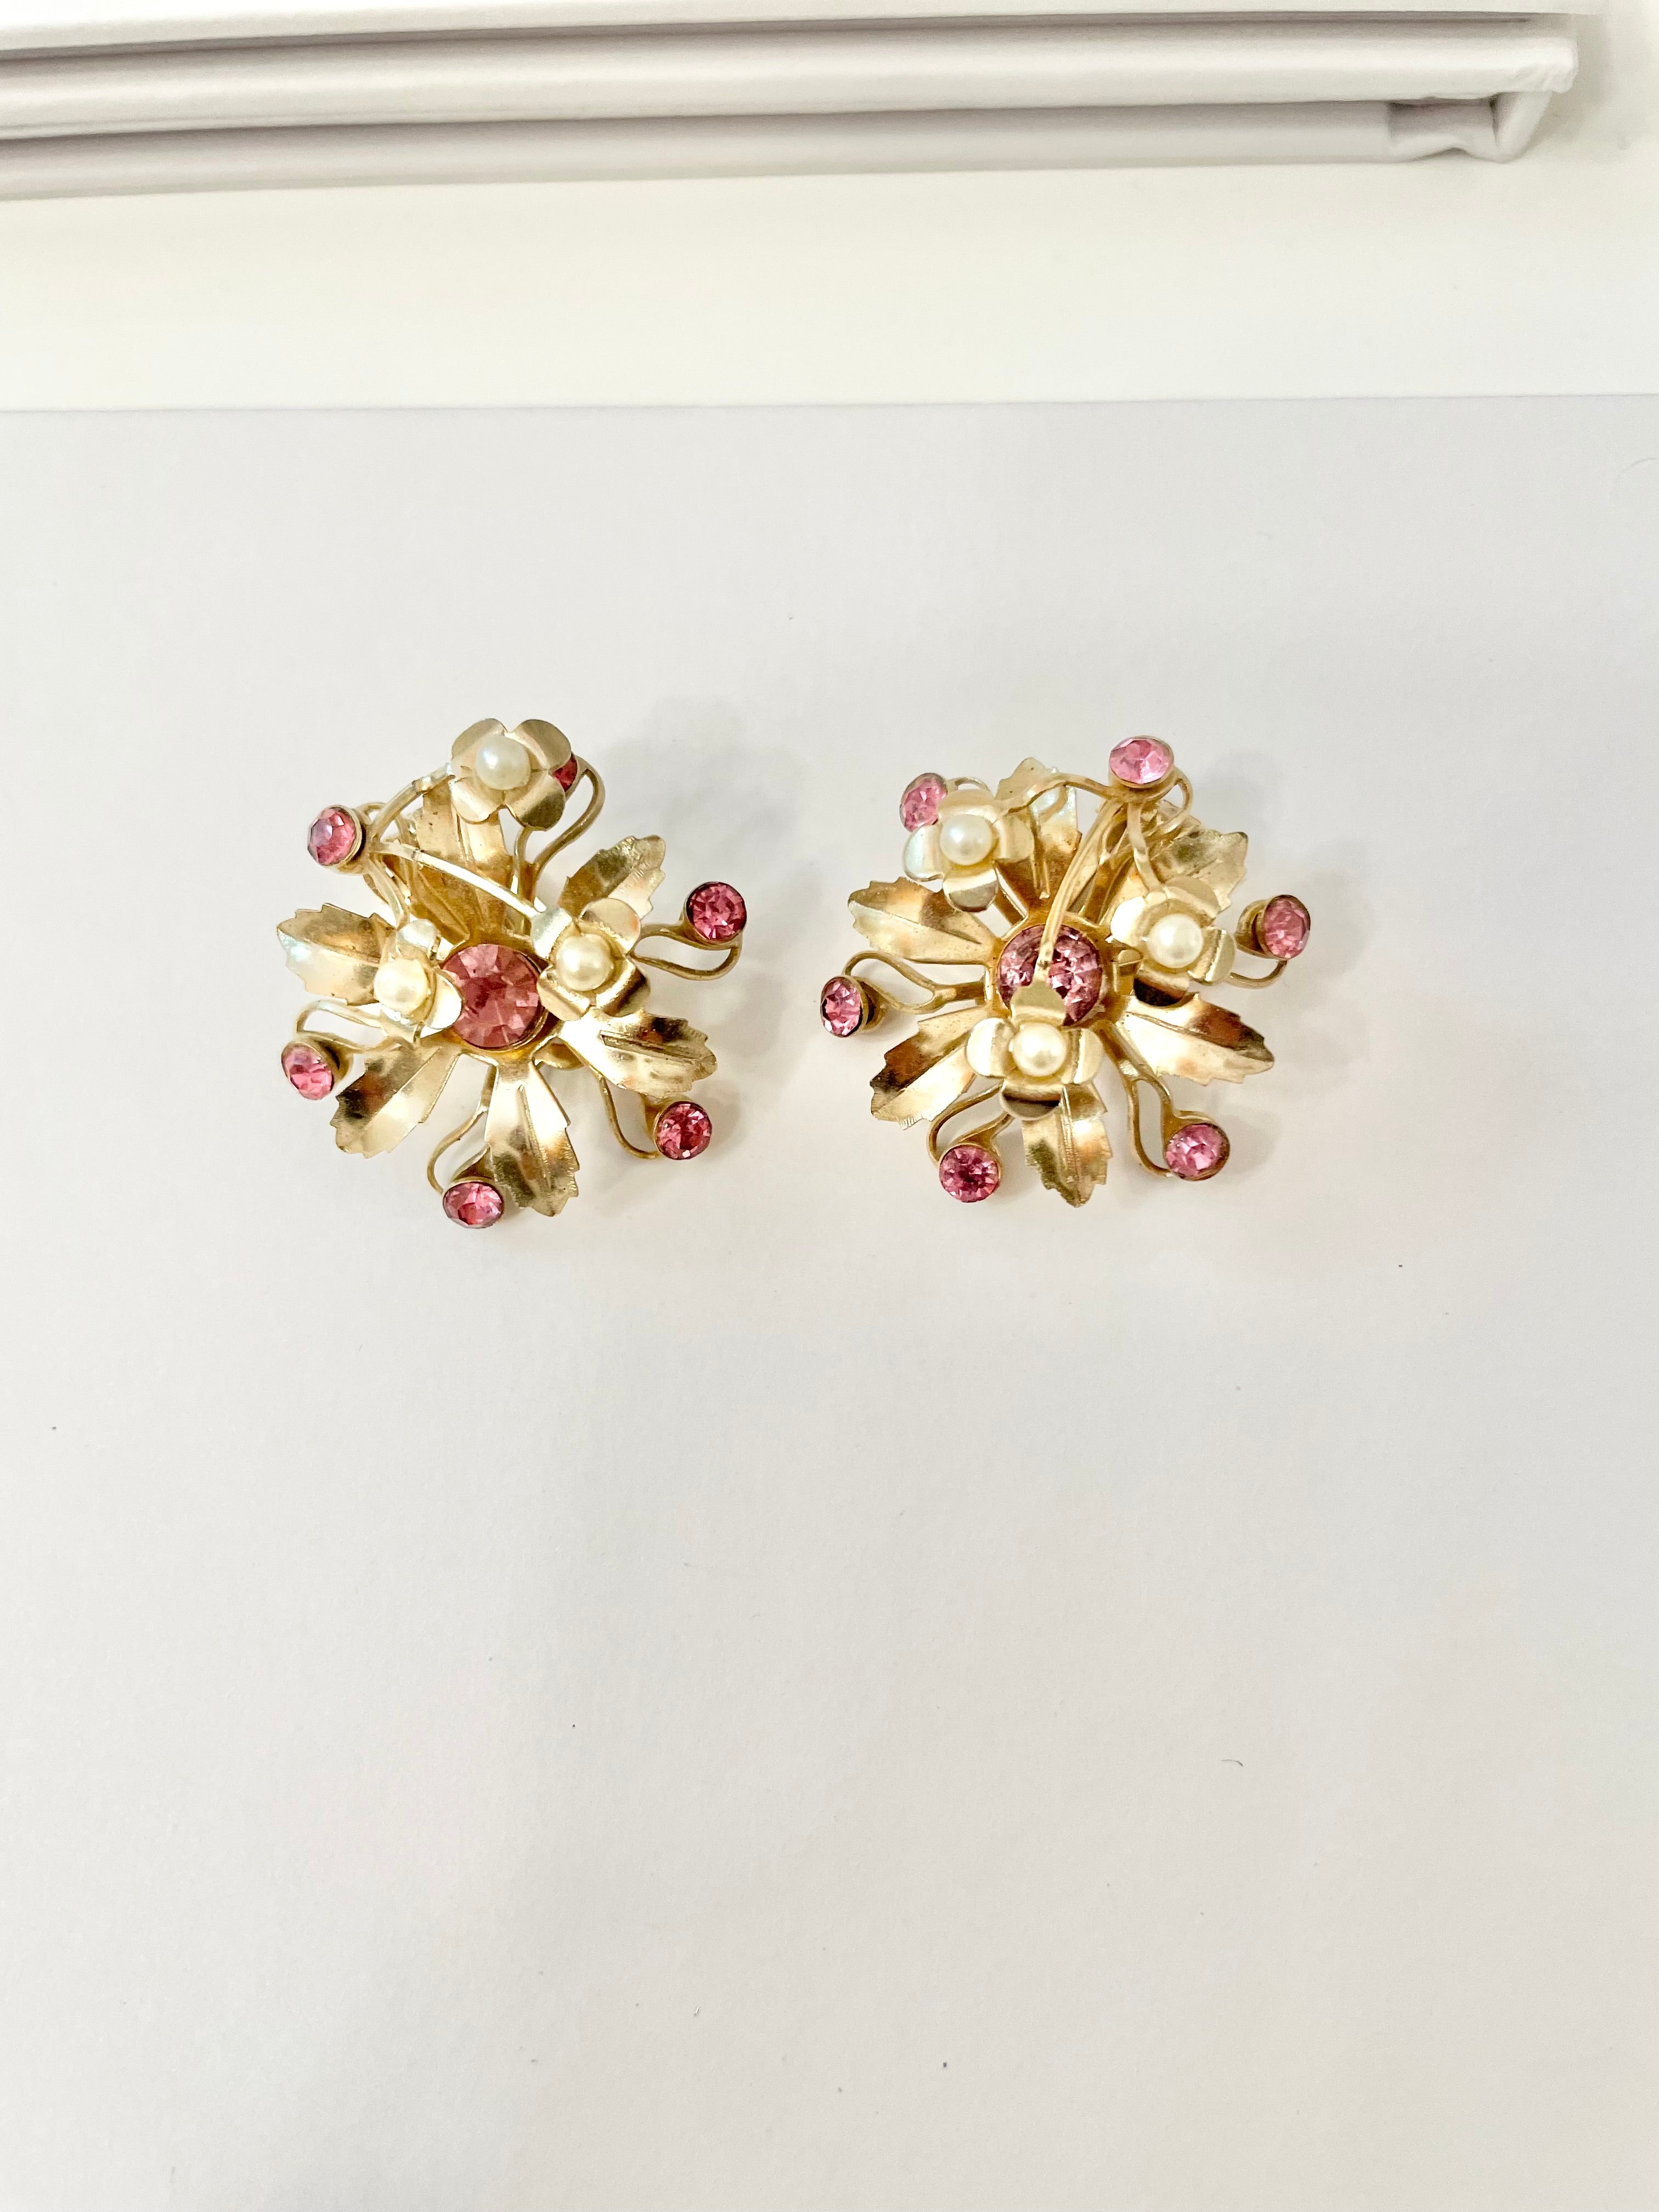 The Flirty Gal and her maddening love of everything pink! These pink and pearl sculpted flower earrings are pure perfection!